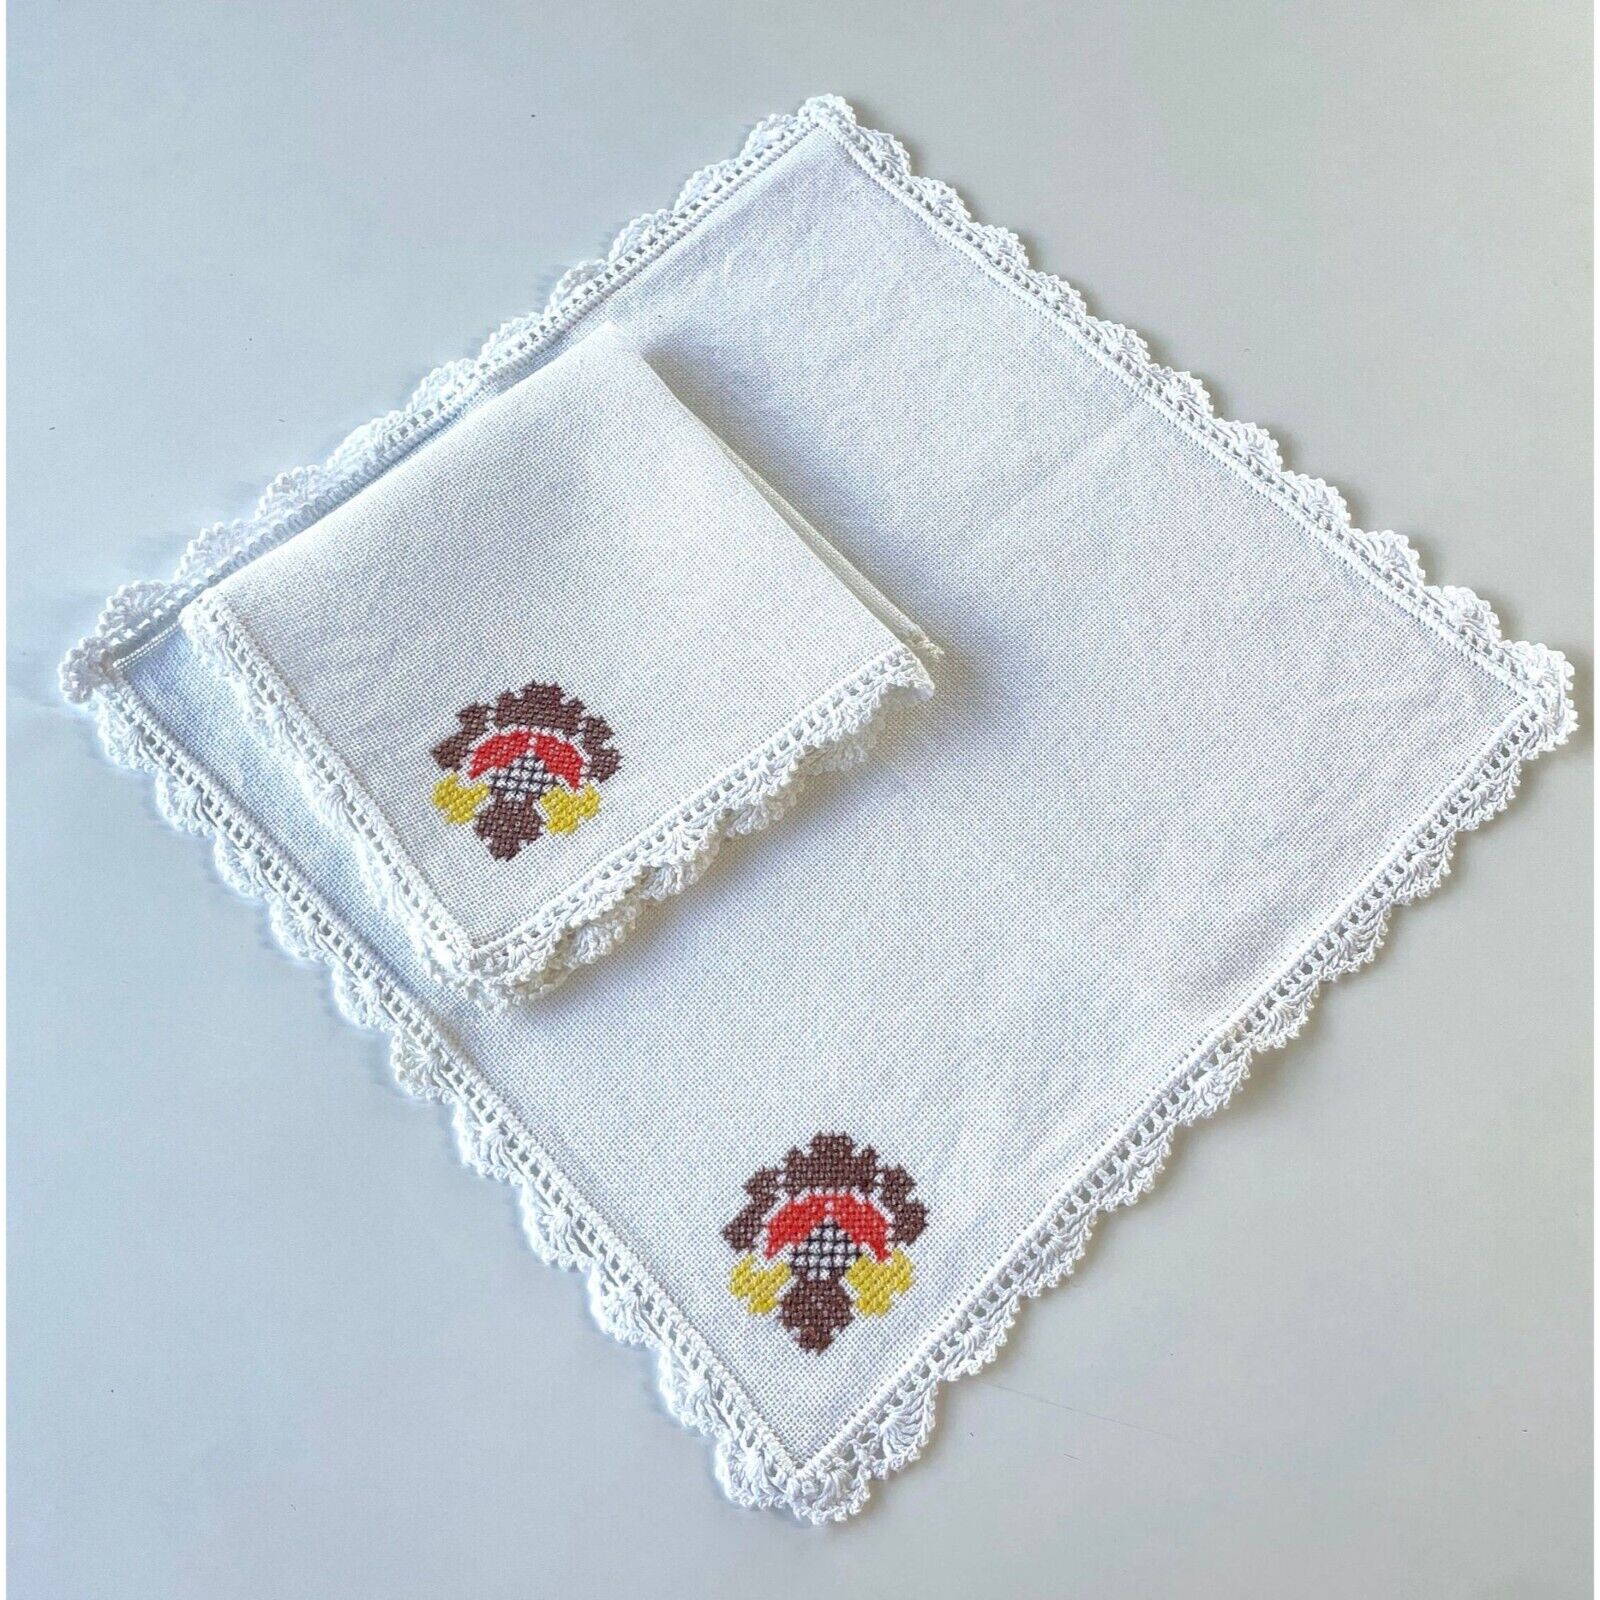 Vintage 80s linen napkins, pair of embroidered napkins, country core table linen